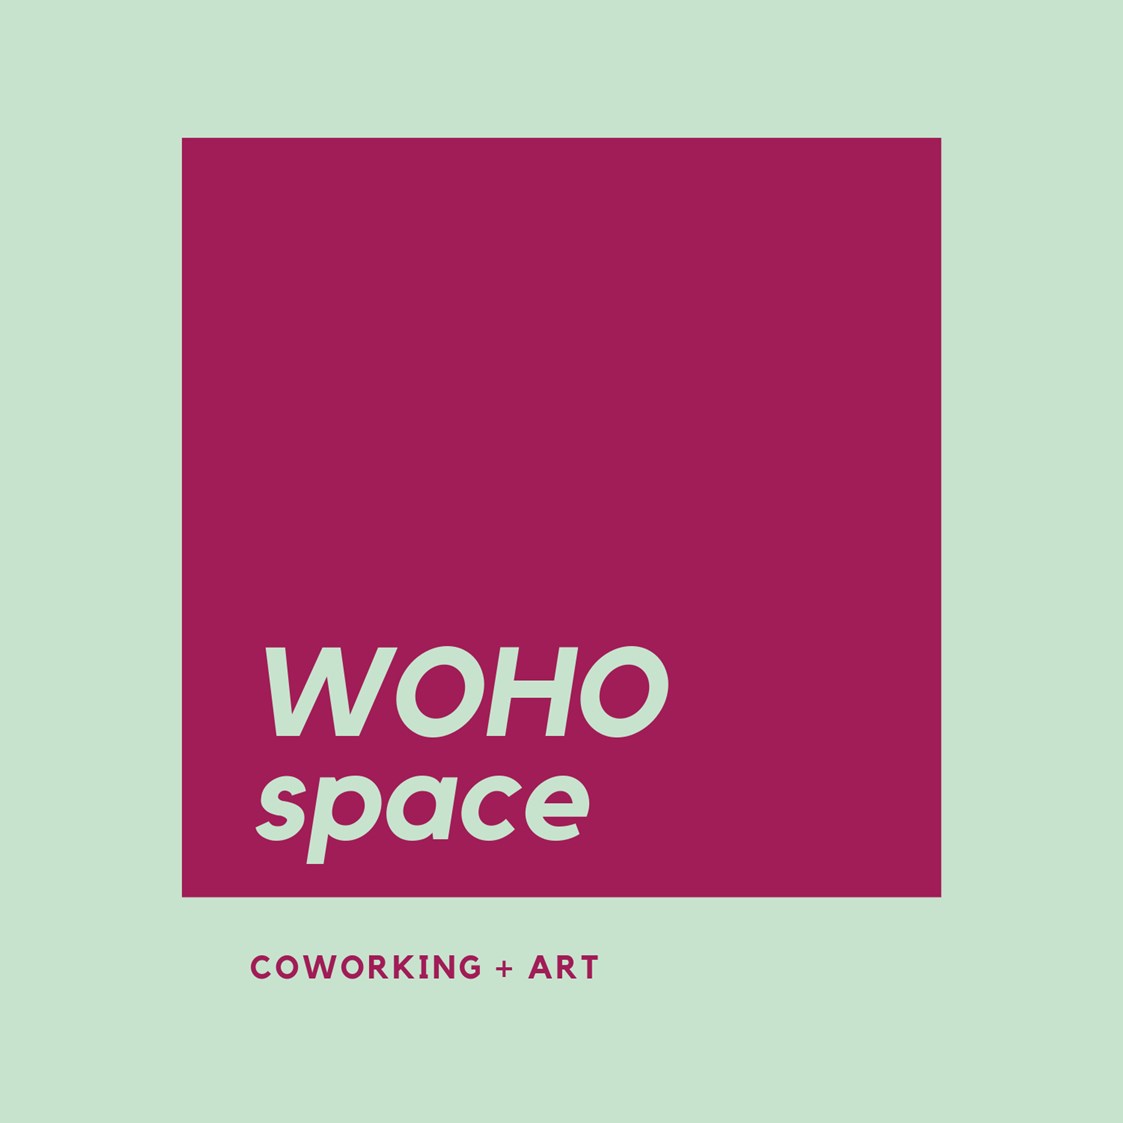 Coworking Space: woho space